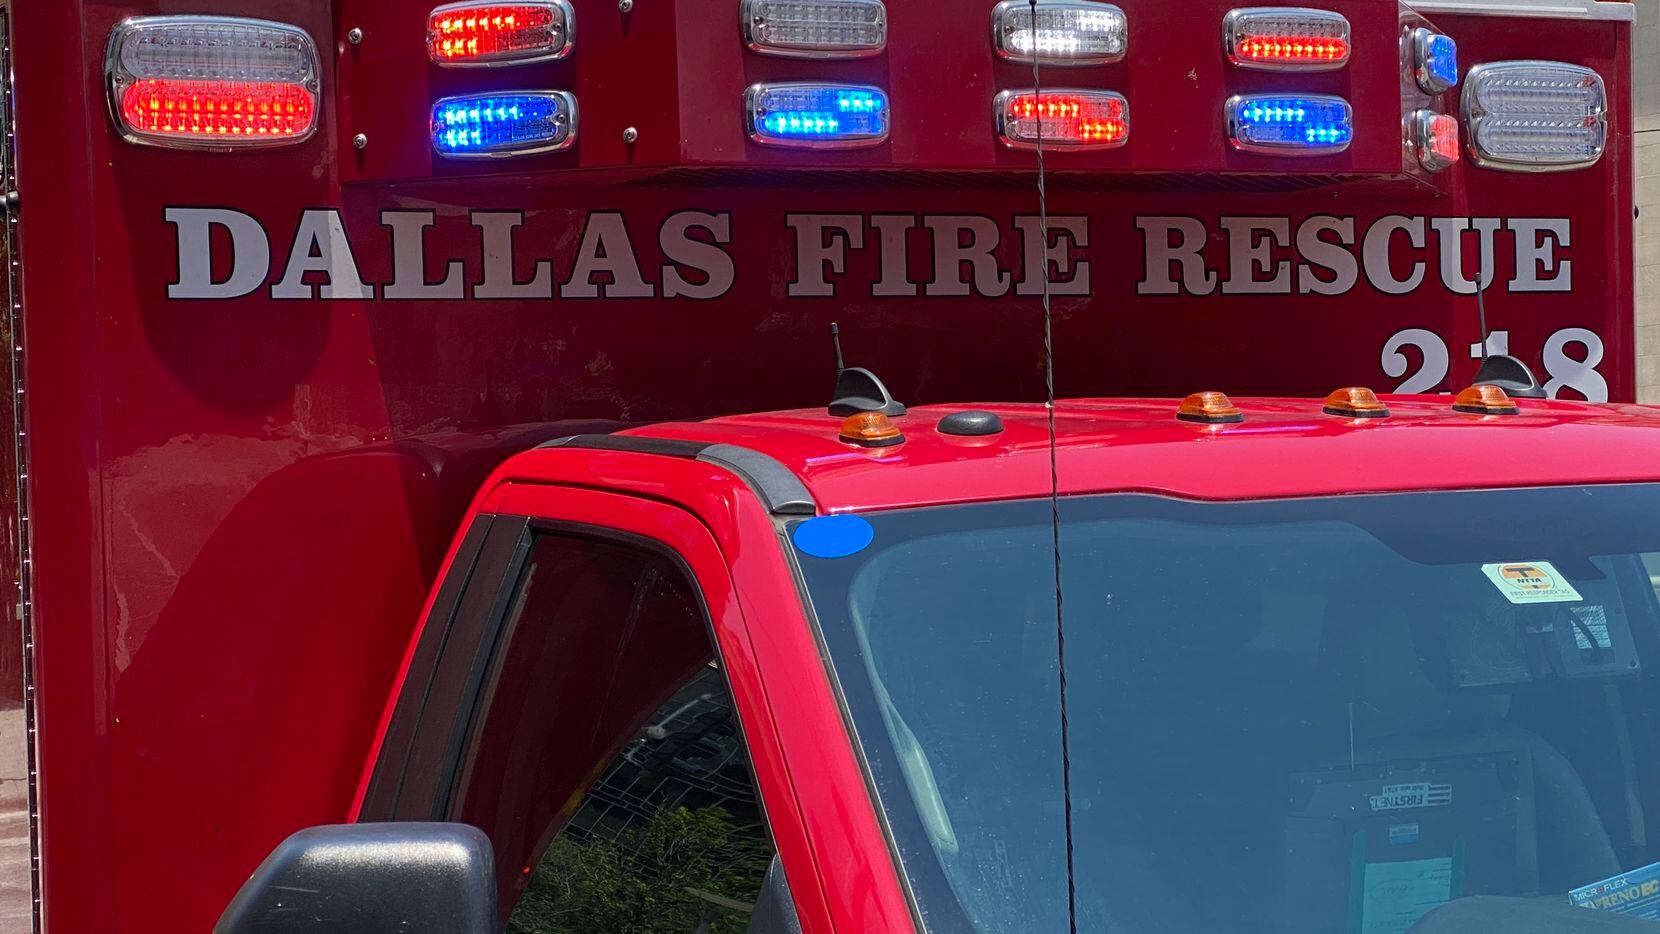 Dallas Fire-Rescue works in downtown Dallas on the corner of Commerce Street and Harwood...